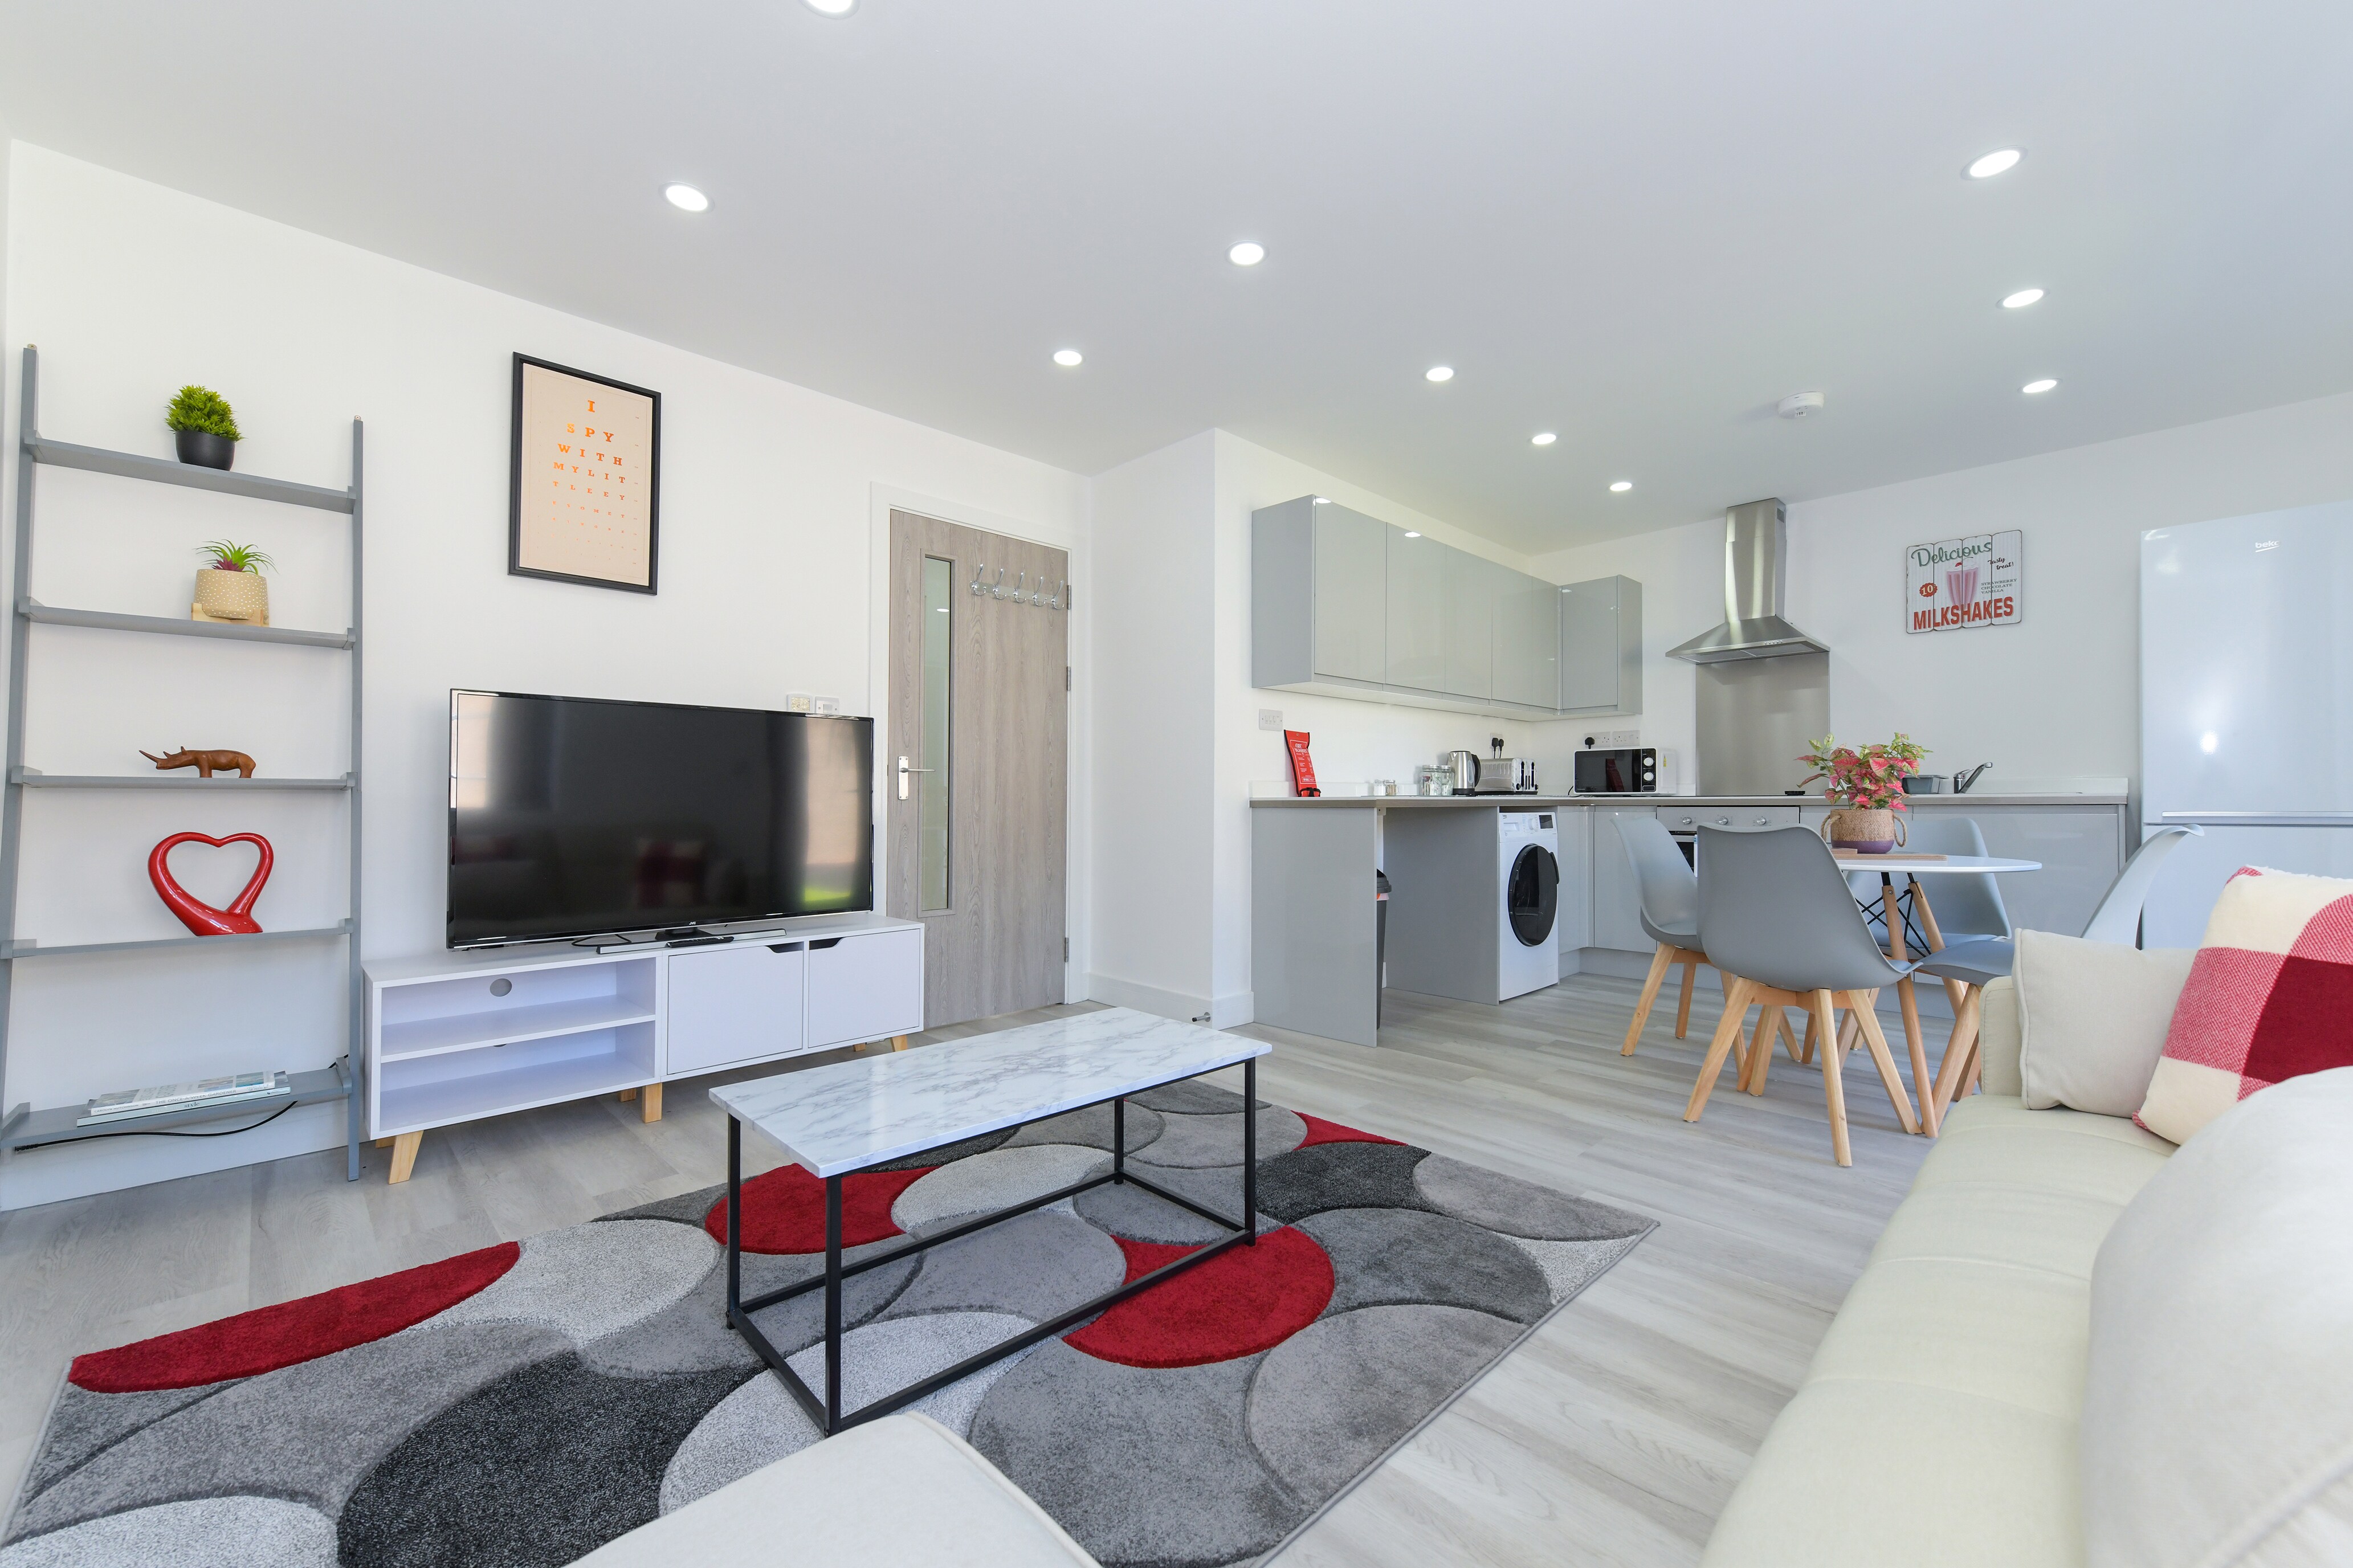 Property Image 1 - Contemporary & Chic 2bed Home, Low Carbon, Parking